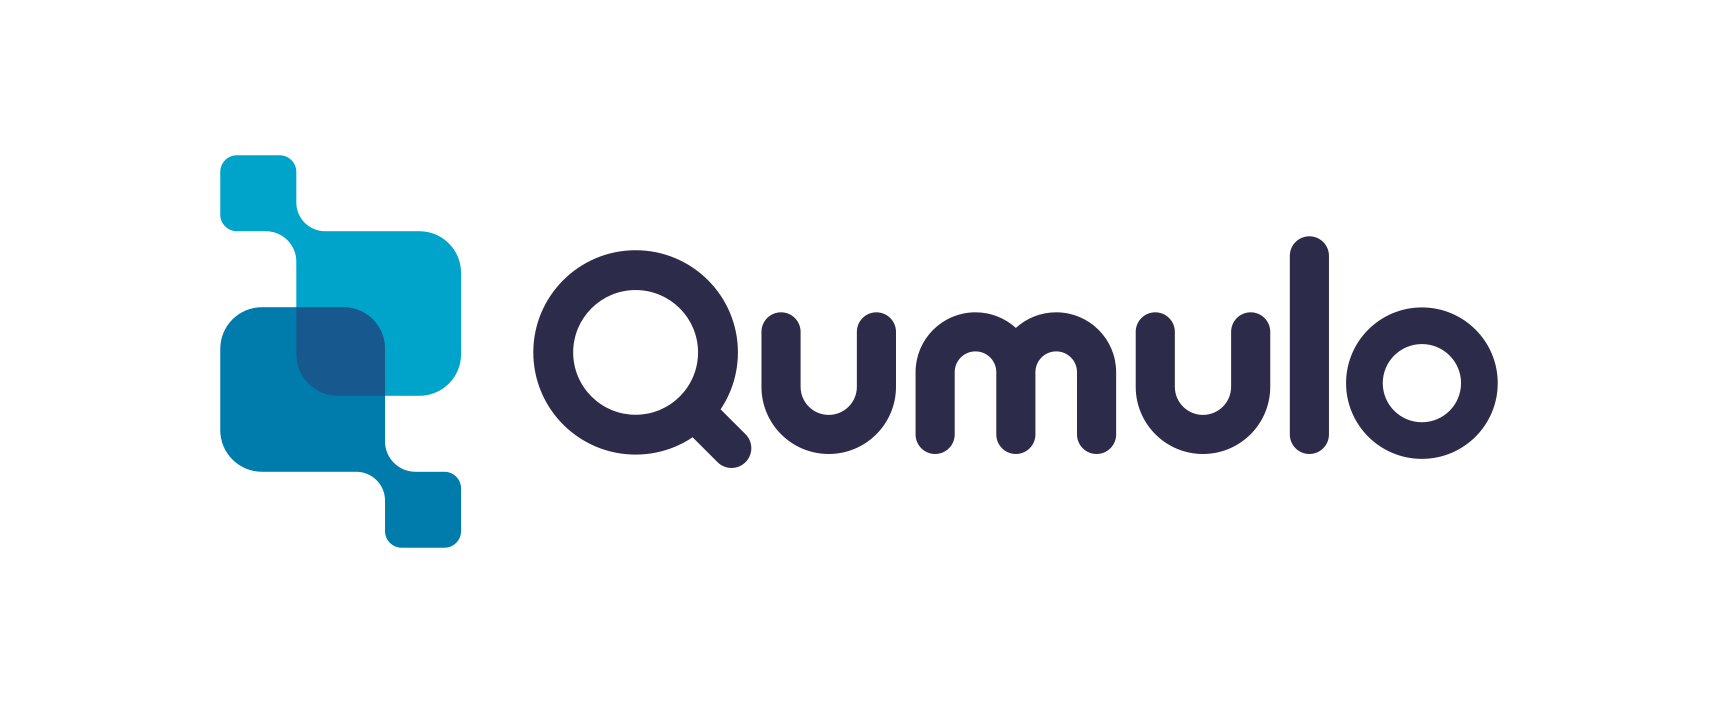 Qumulo Simplifies Kubernetes Workflows on Unstructured Data with New Container Storage Interface